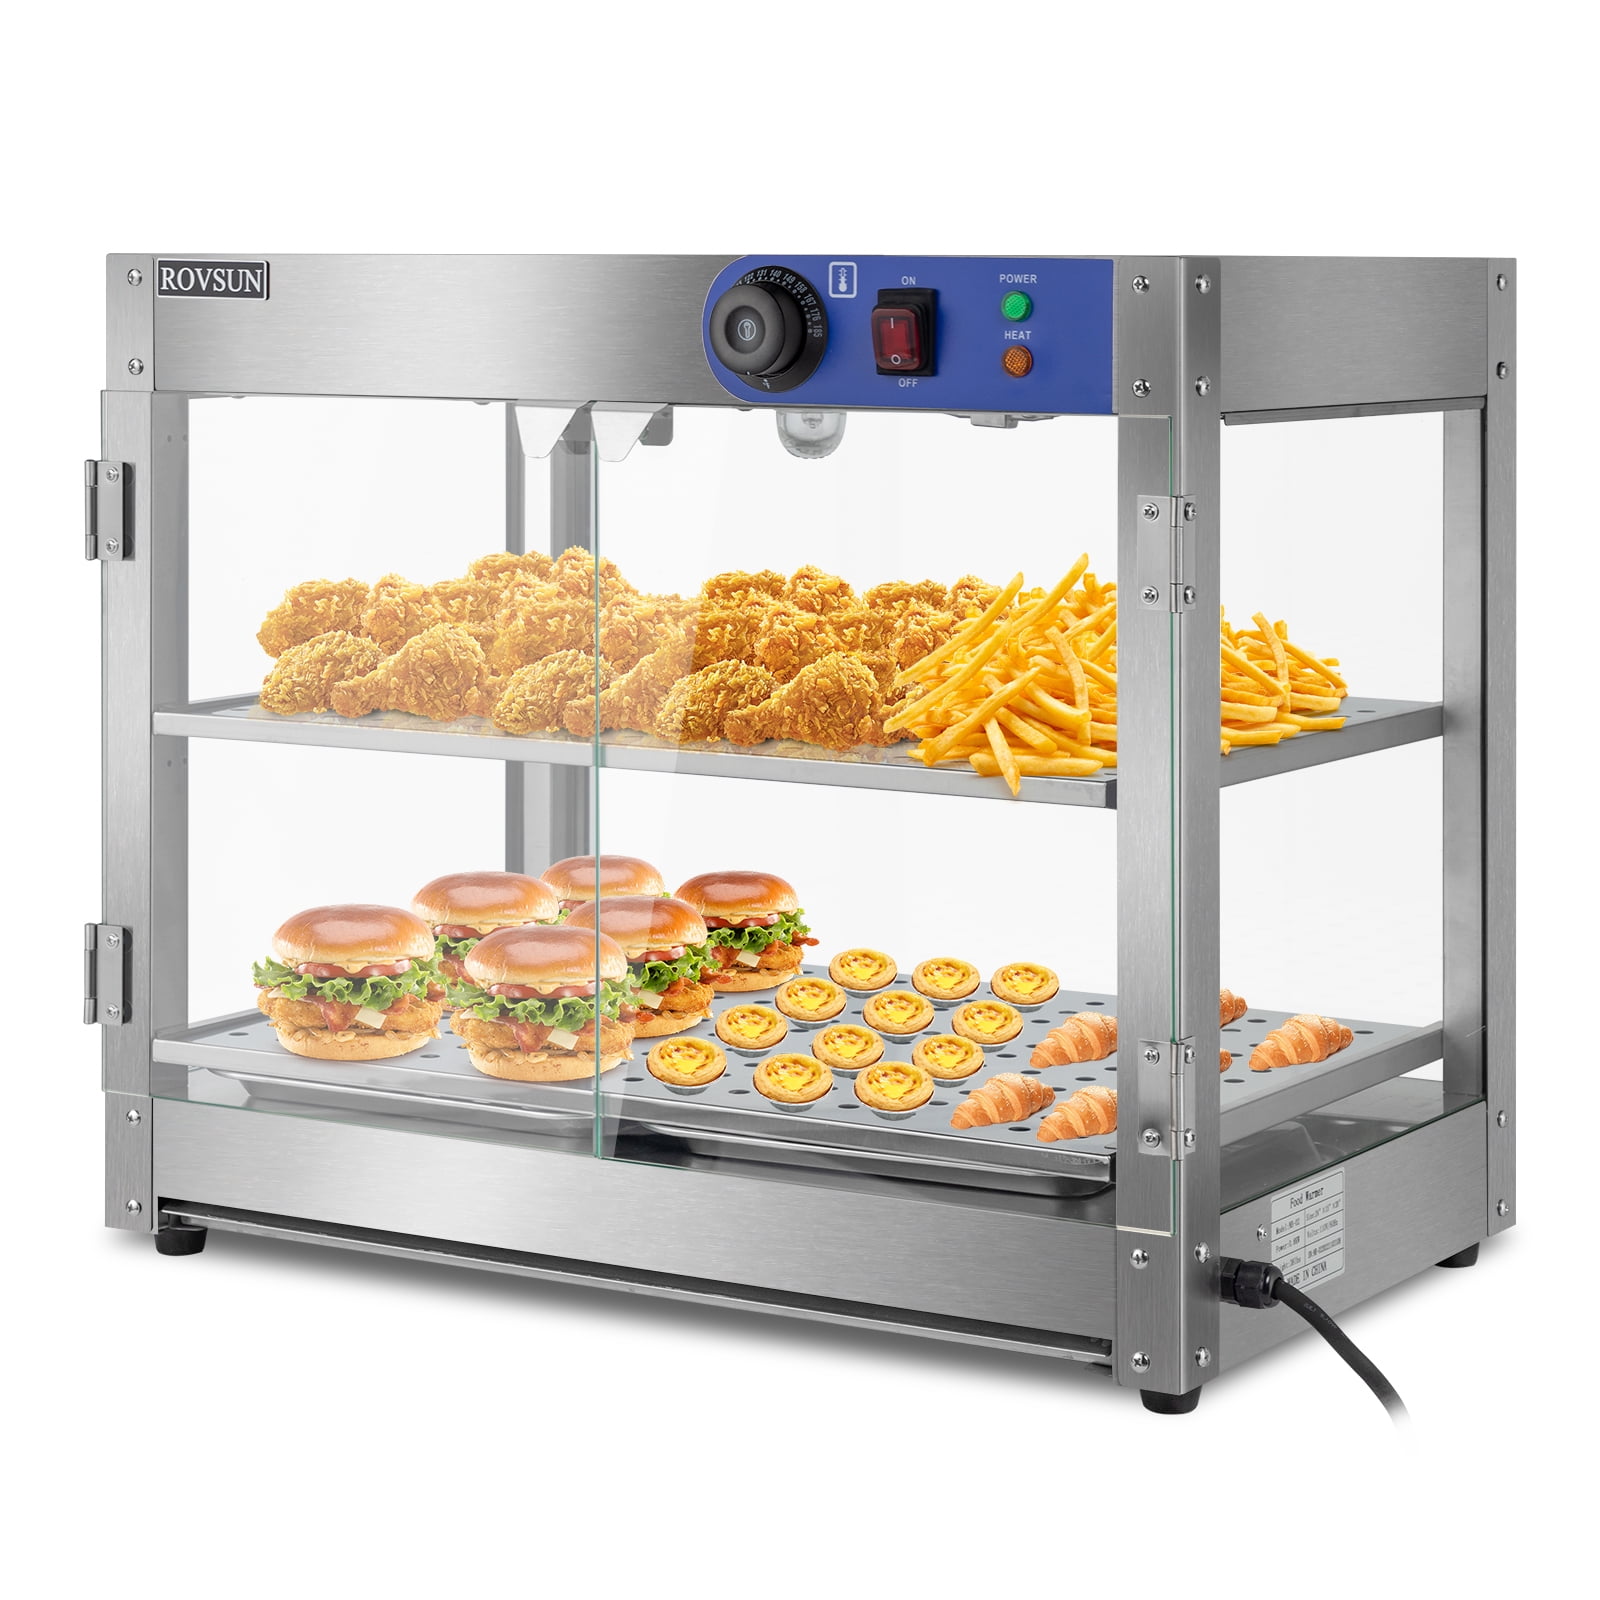 0.8 KW Single Layer Countertop Food Warmer Display TT-WE69A Chinese  restaurant equipment manufacturer and wholesaler